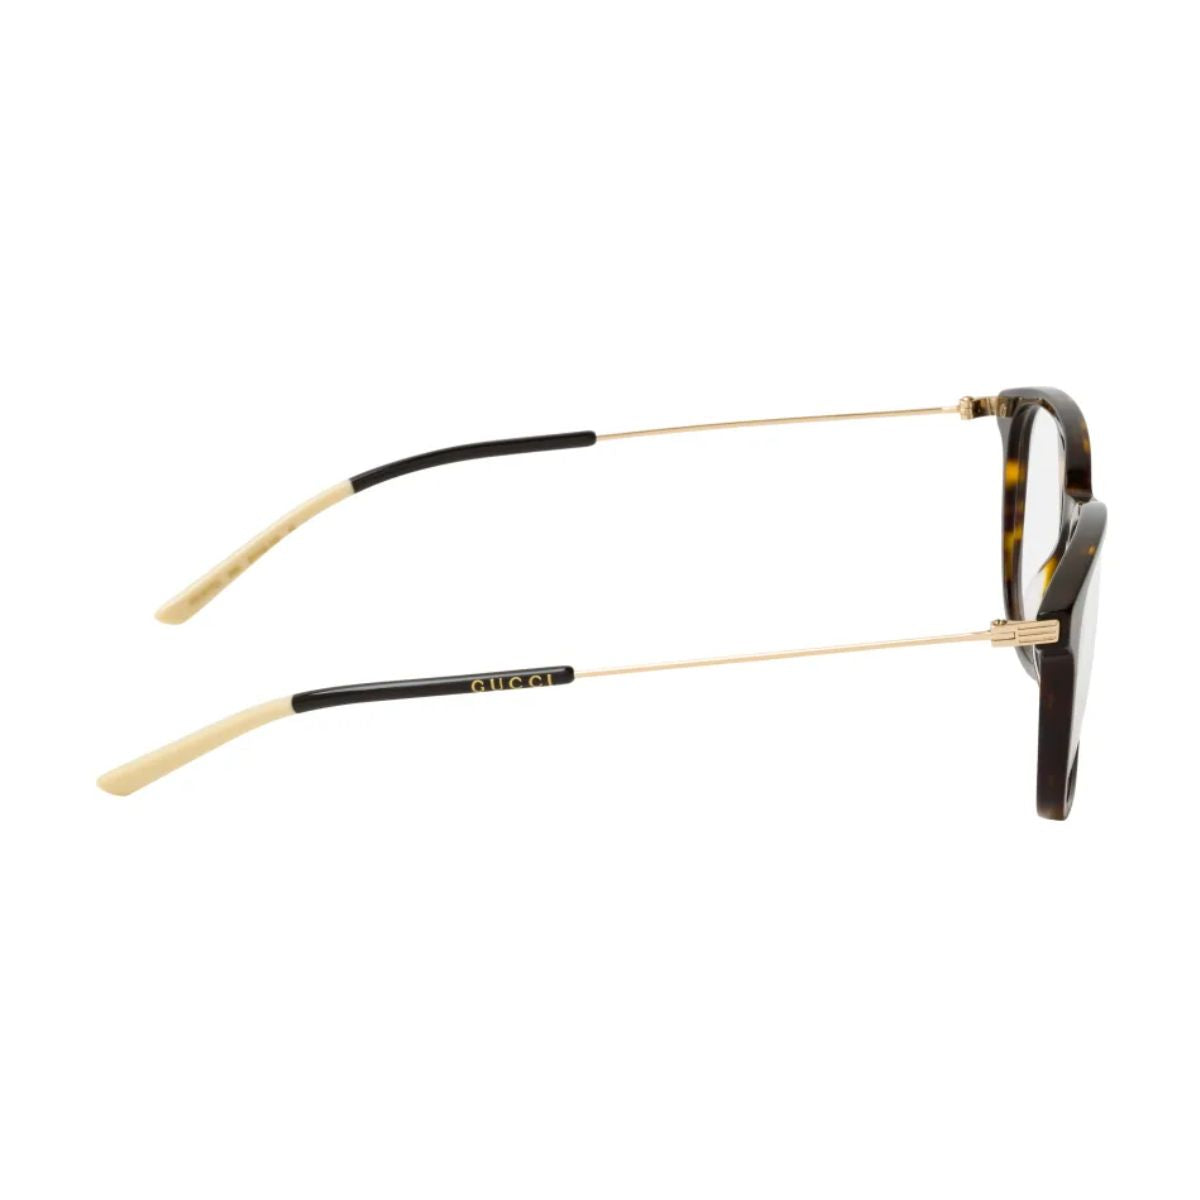  "Gucci 1577O 006 Spectacles - Blend of luxury and versatility in these premium frames from Optorium."